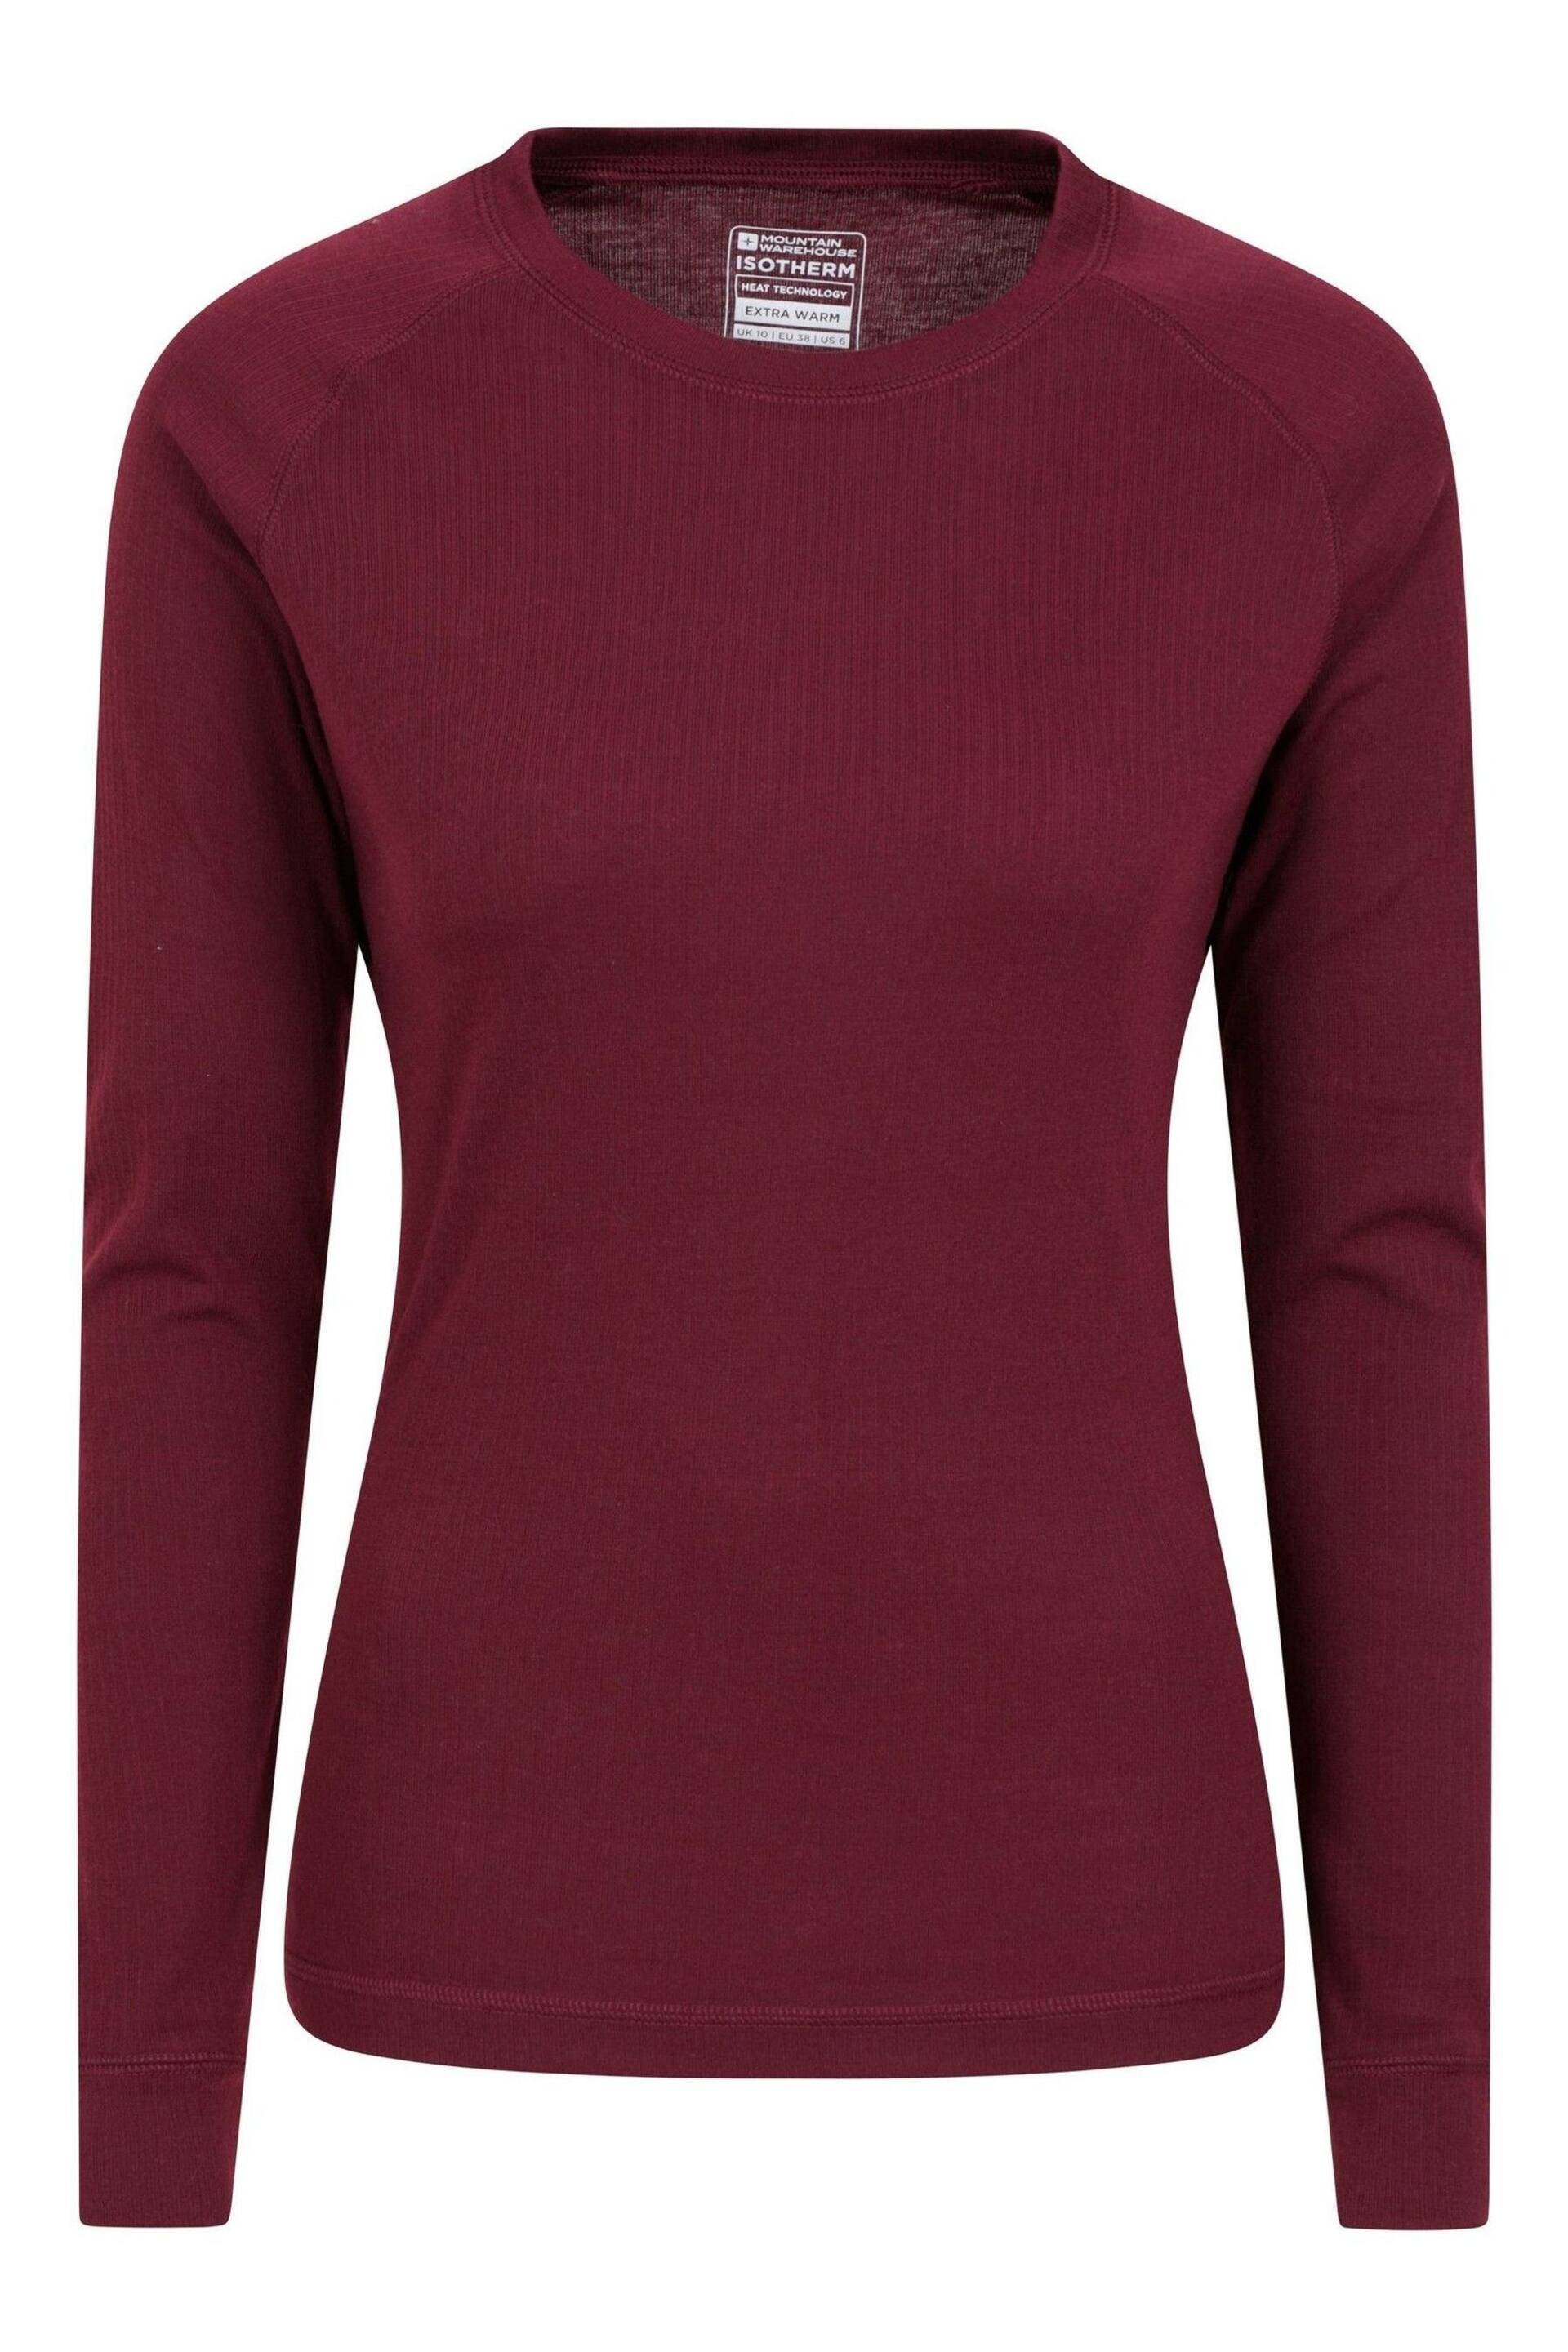 Mountain Warehouse Pink Womens Talus Round Neck Thermal Top - Image 4 of 7